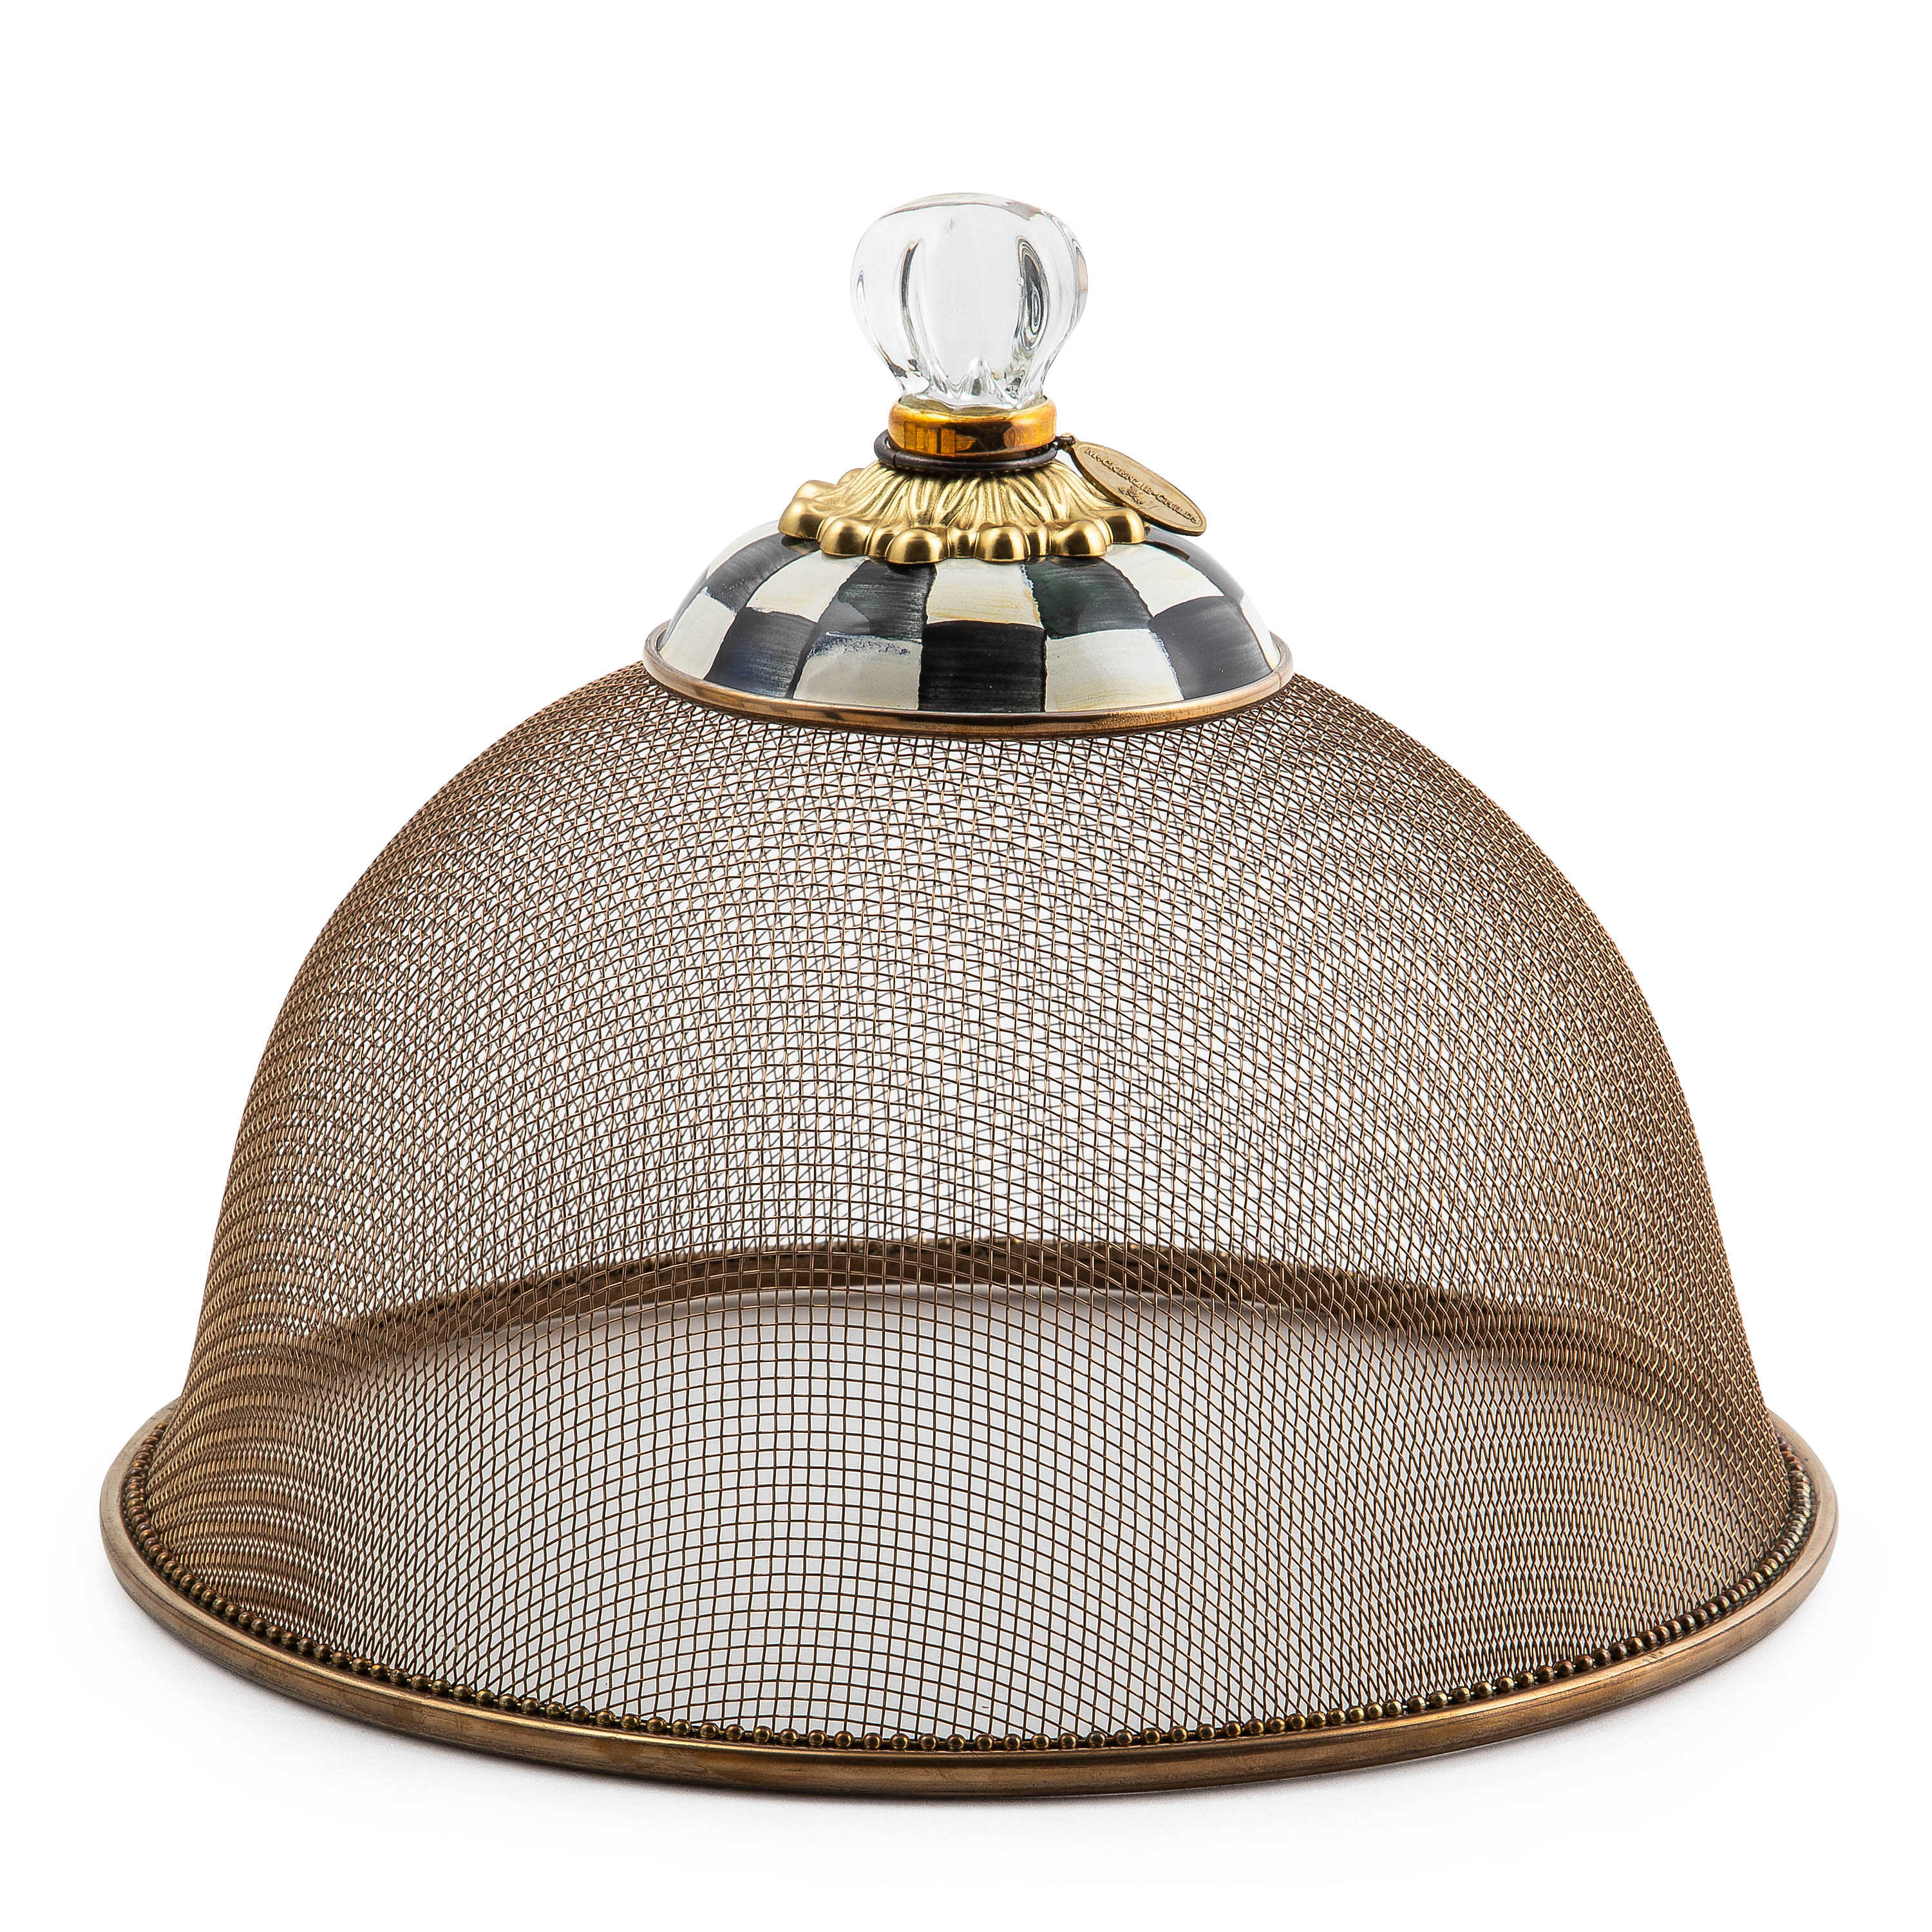 Courtly Check Small Mesh Dome mackenzie-childs Panama 0